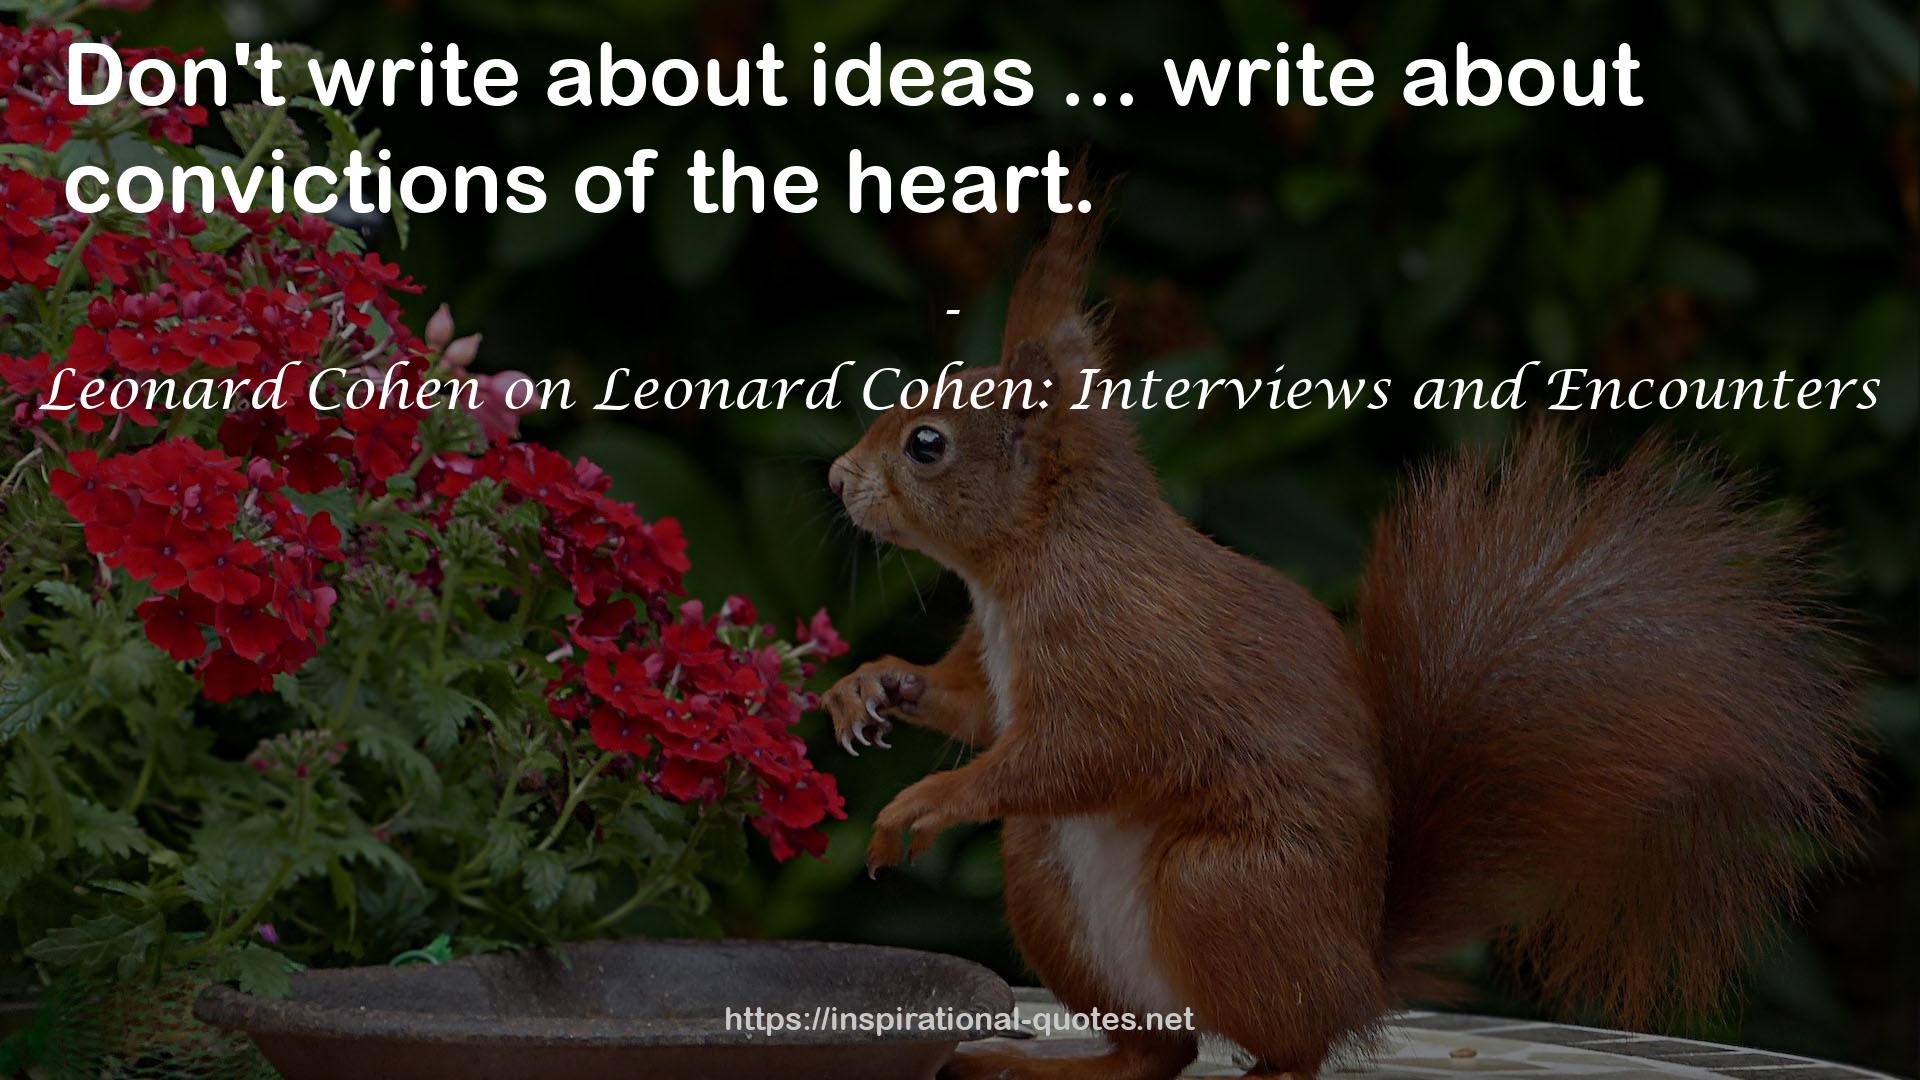 Leonard Cohen on Leonard Cohen: Interviews and Encounters QUOTES